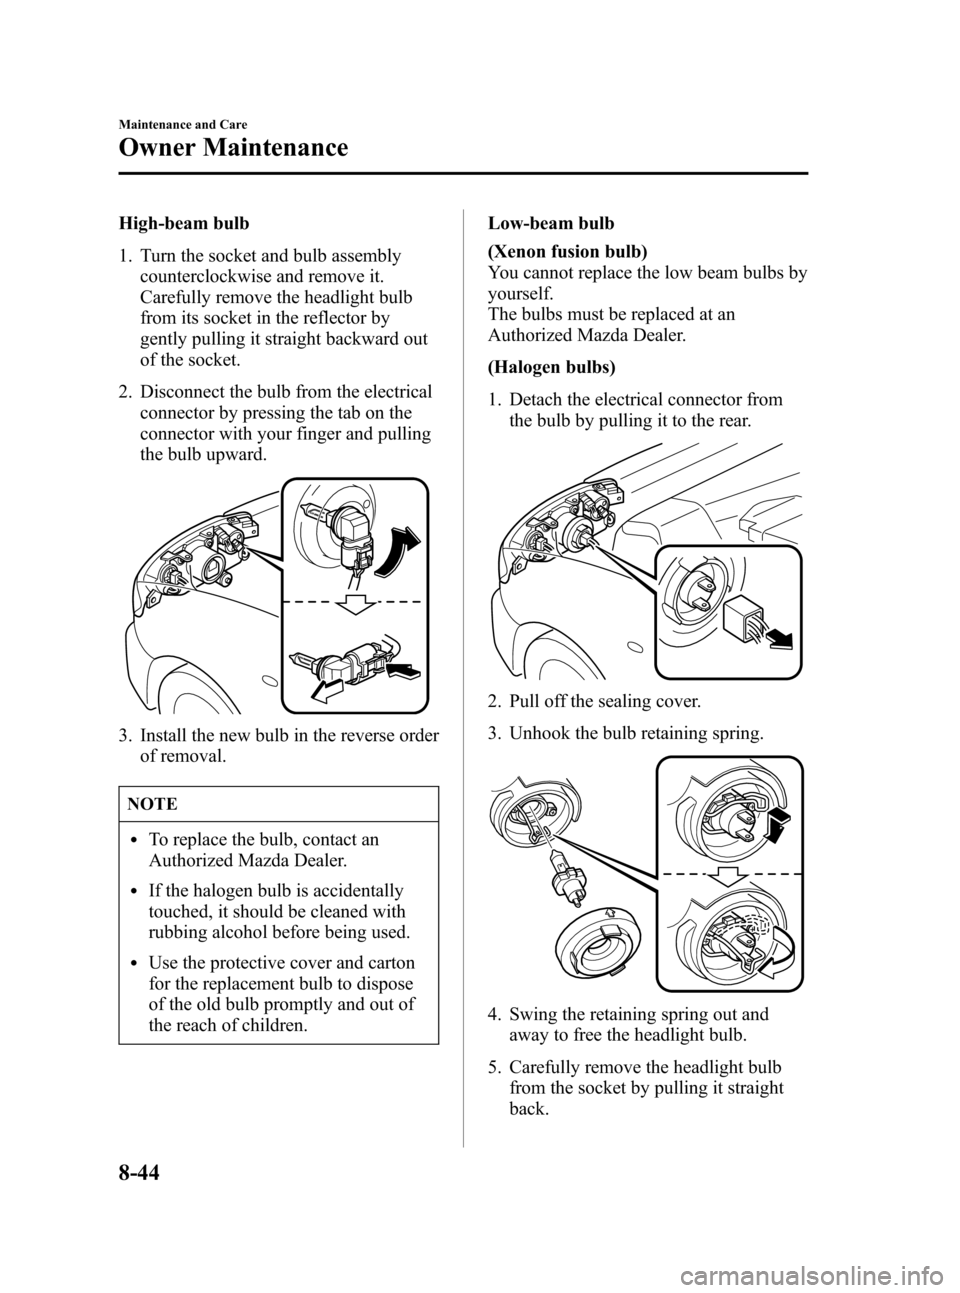 MAZDA MODEL 3 HATCHBACK 2006  Owners Manual (in English) Black plate (292,1)
High-beam bulb
1. Turn the socket and bulb assembly
counterclockwise and remove it.
Carefully remove the headlight bulb
from its socket in the reflector by
gently pulling it straig